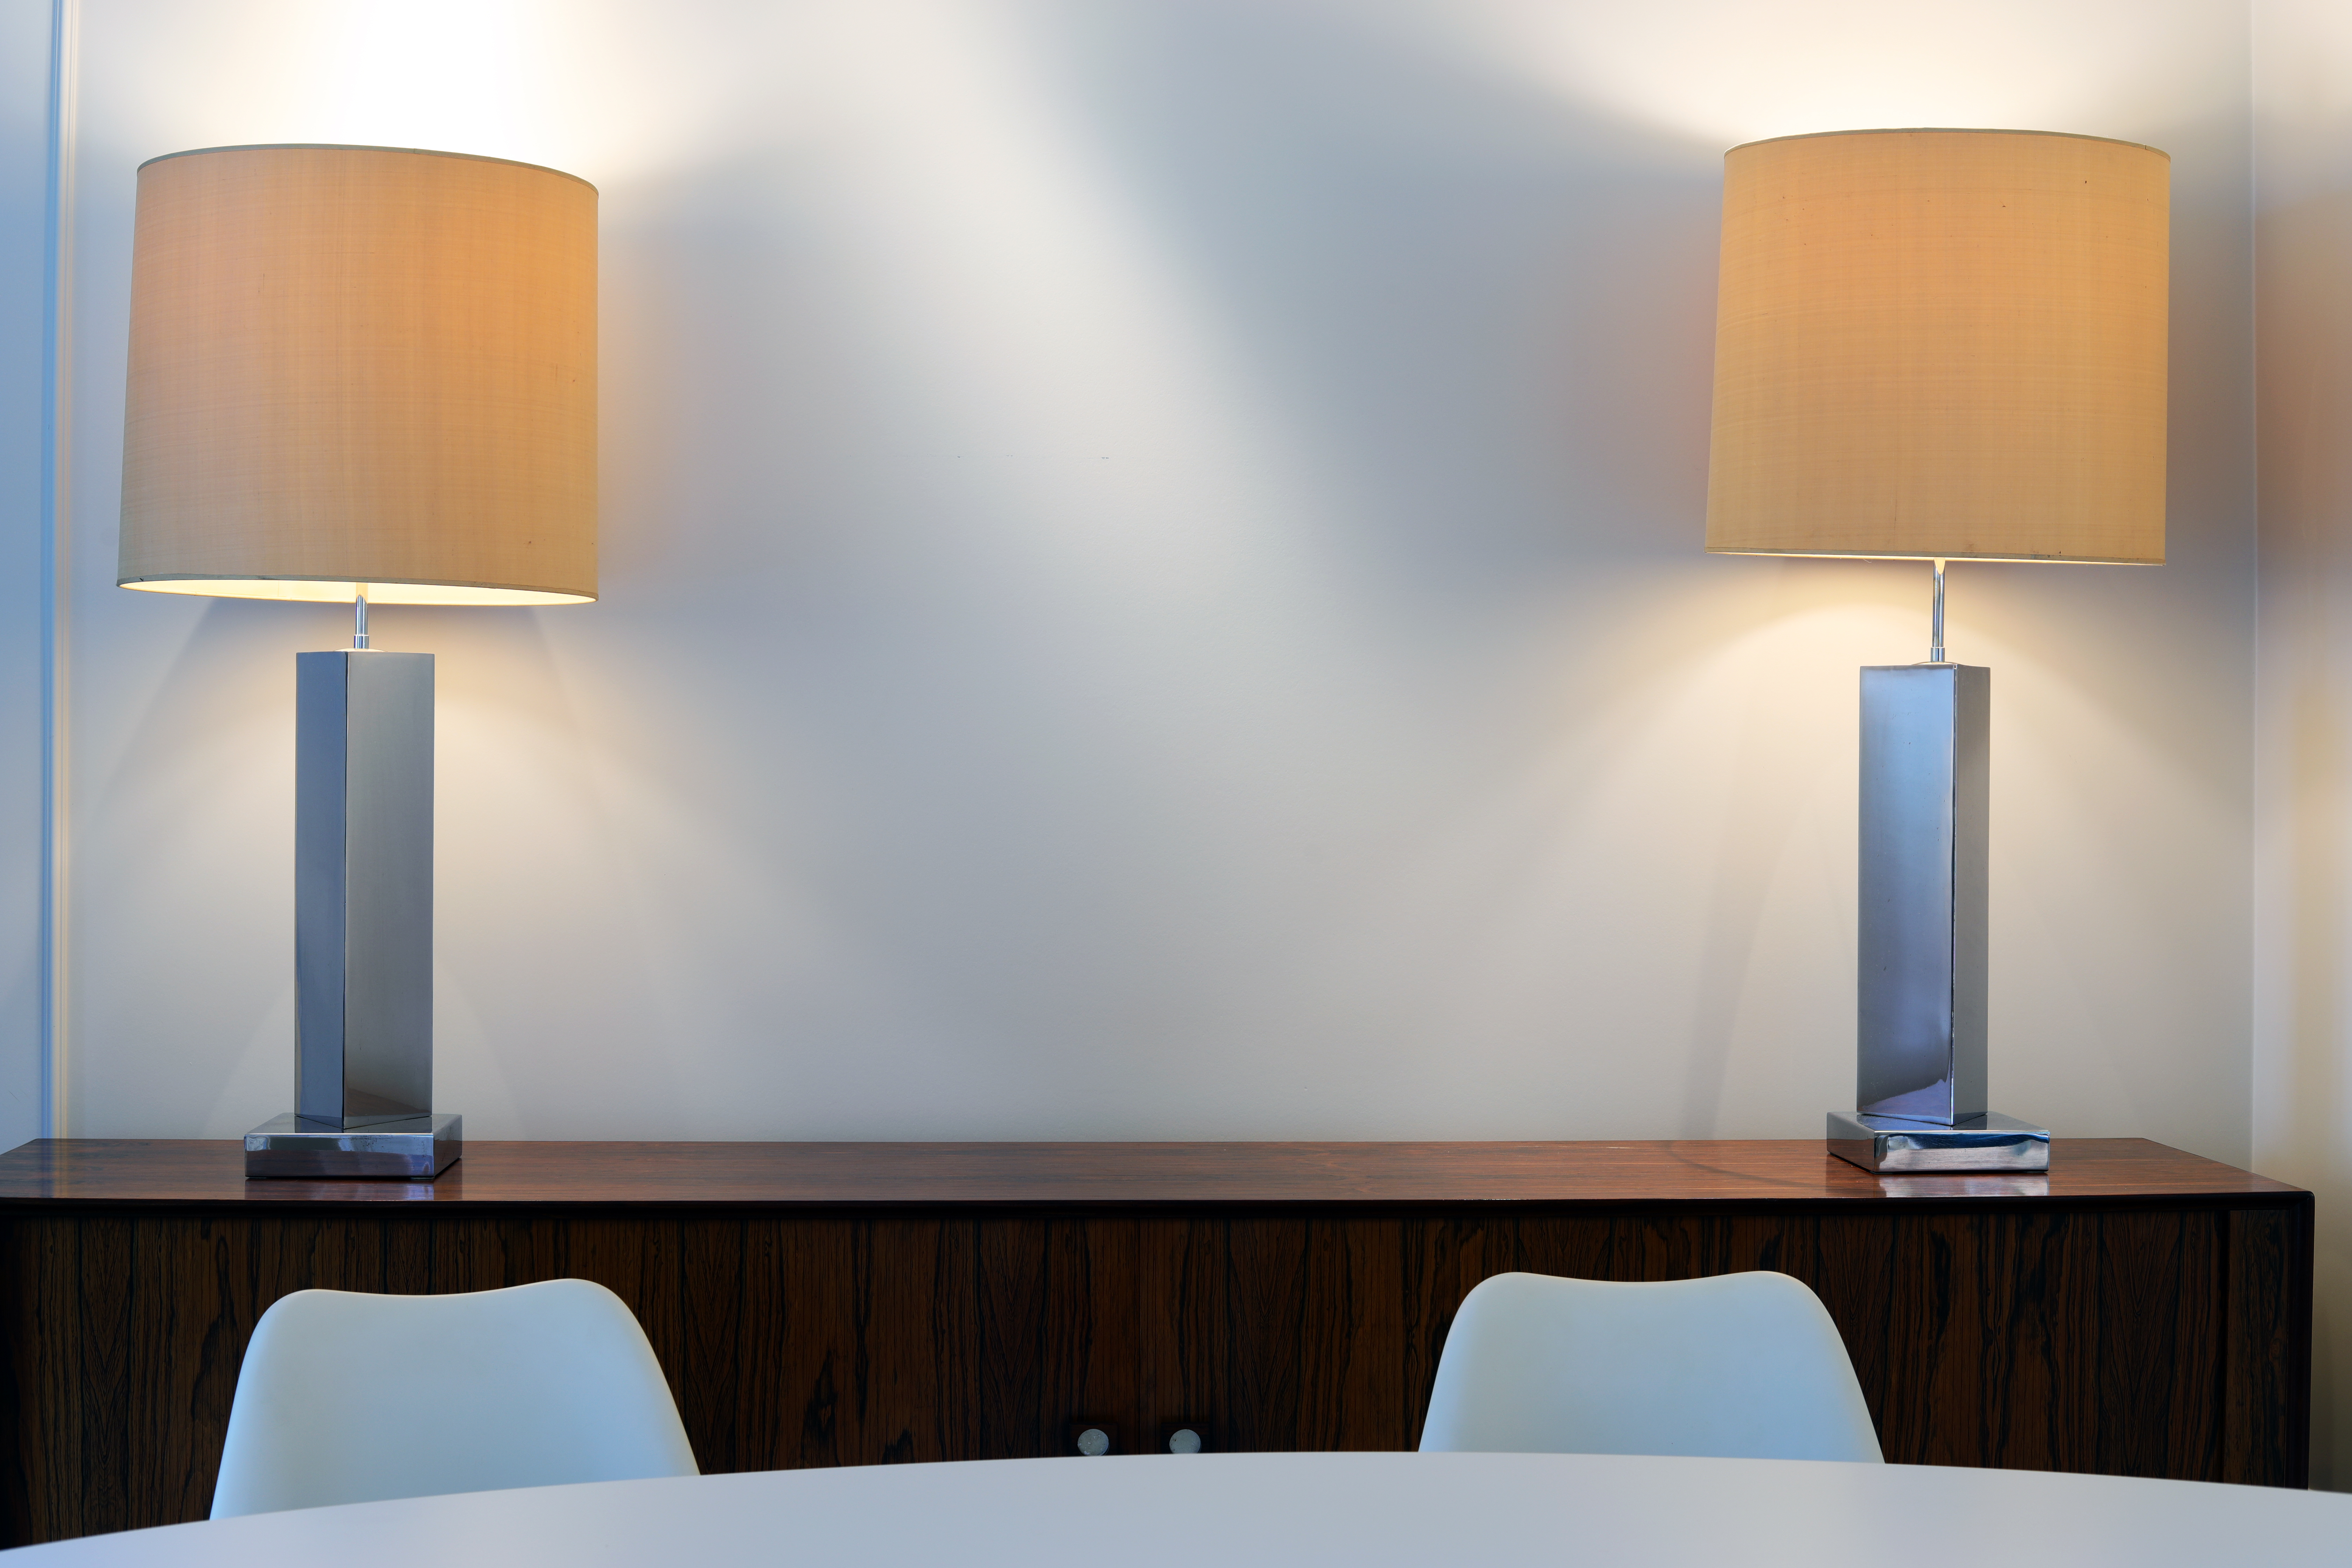 Couple XXL table lamps by Belgo Chrome, 1970's